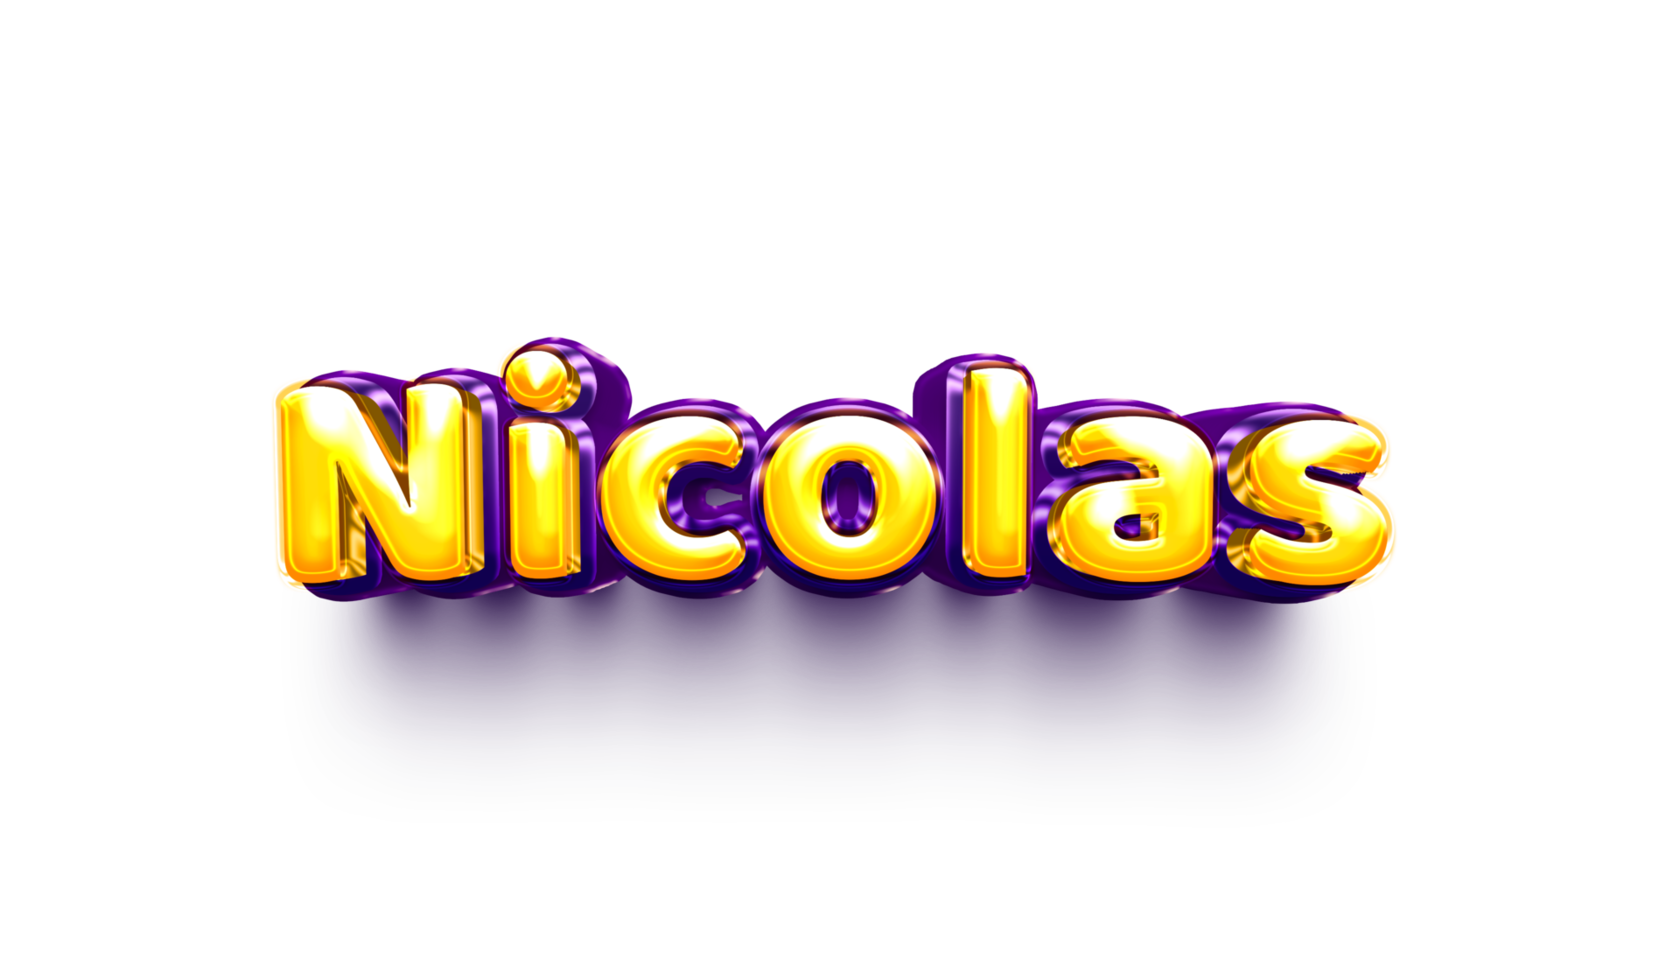 names of boy English helium balloon shiny celebration sticker 3d inflated Nicolas png